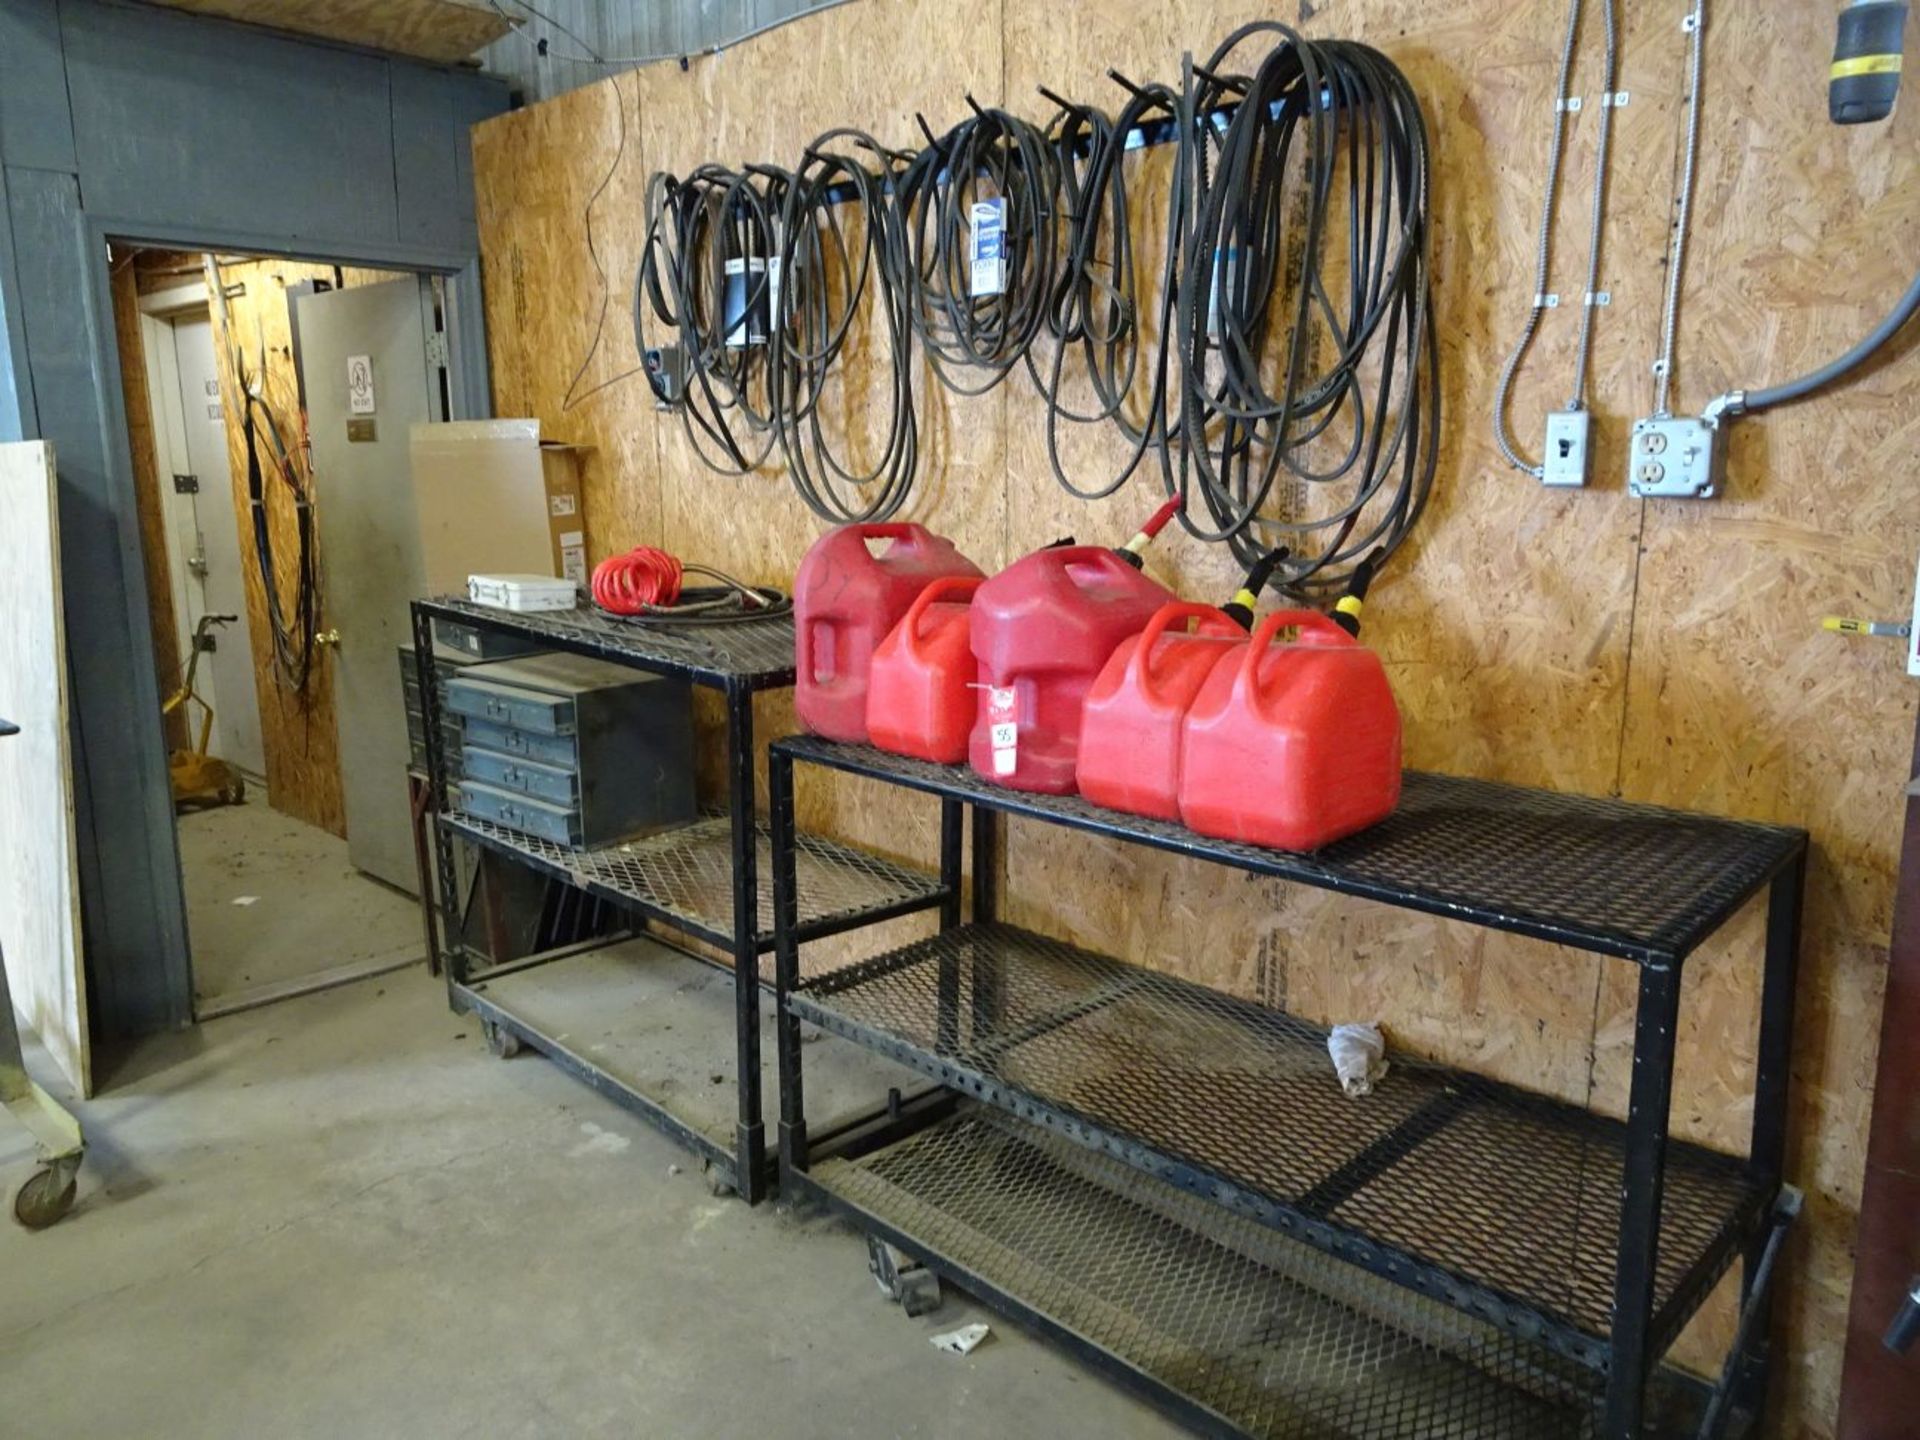 ASSORTED ITEMS, INCLUDES (5) GAS CANS, VARIOUS BELTS, PARTS ORGANIZERS, AND (2) METAL RACKS